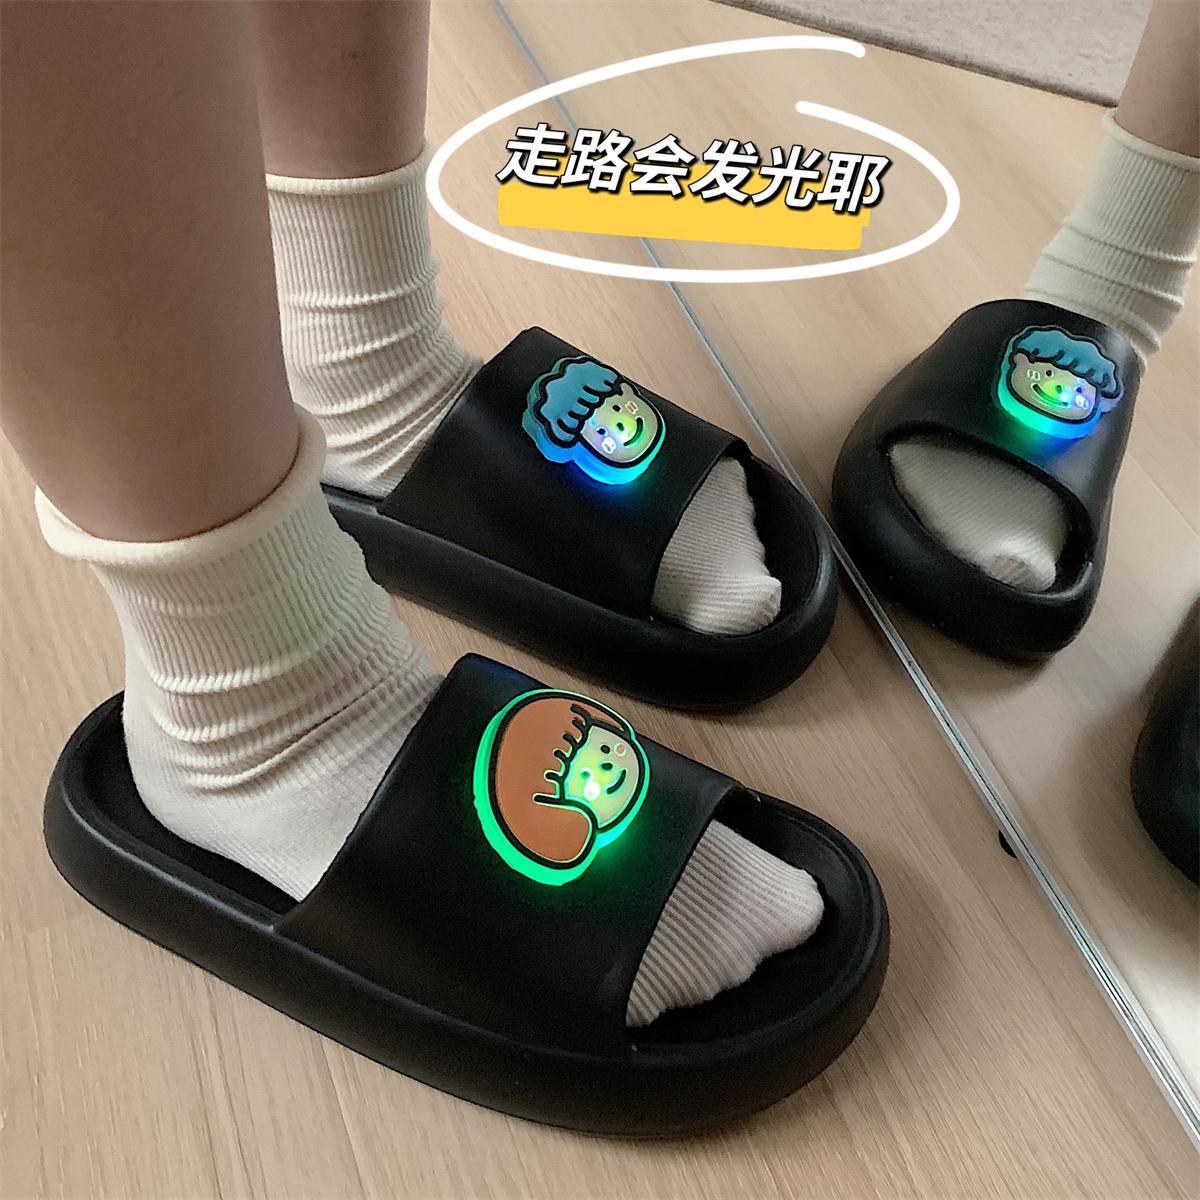 Thin strip female summer fashion creative flashing light small head sandals and slippers non-slip eva thick bottom outerwear slippers